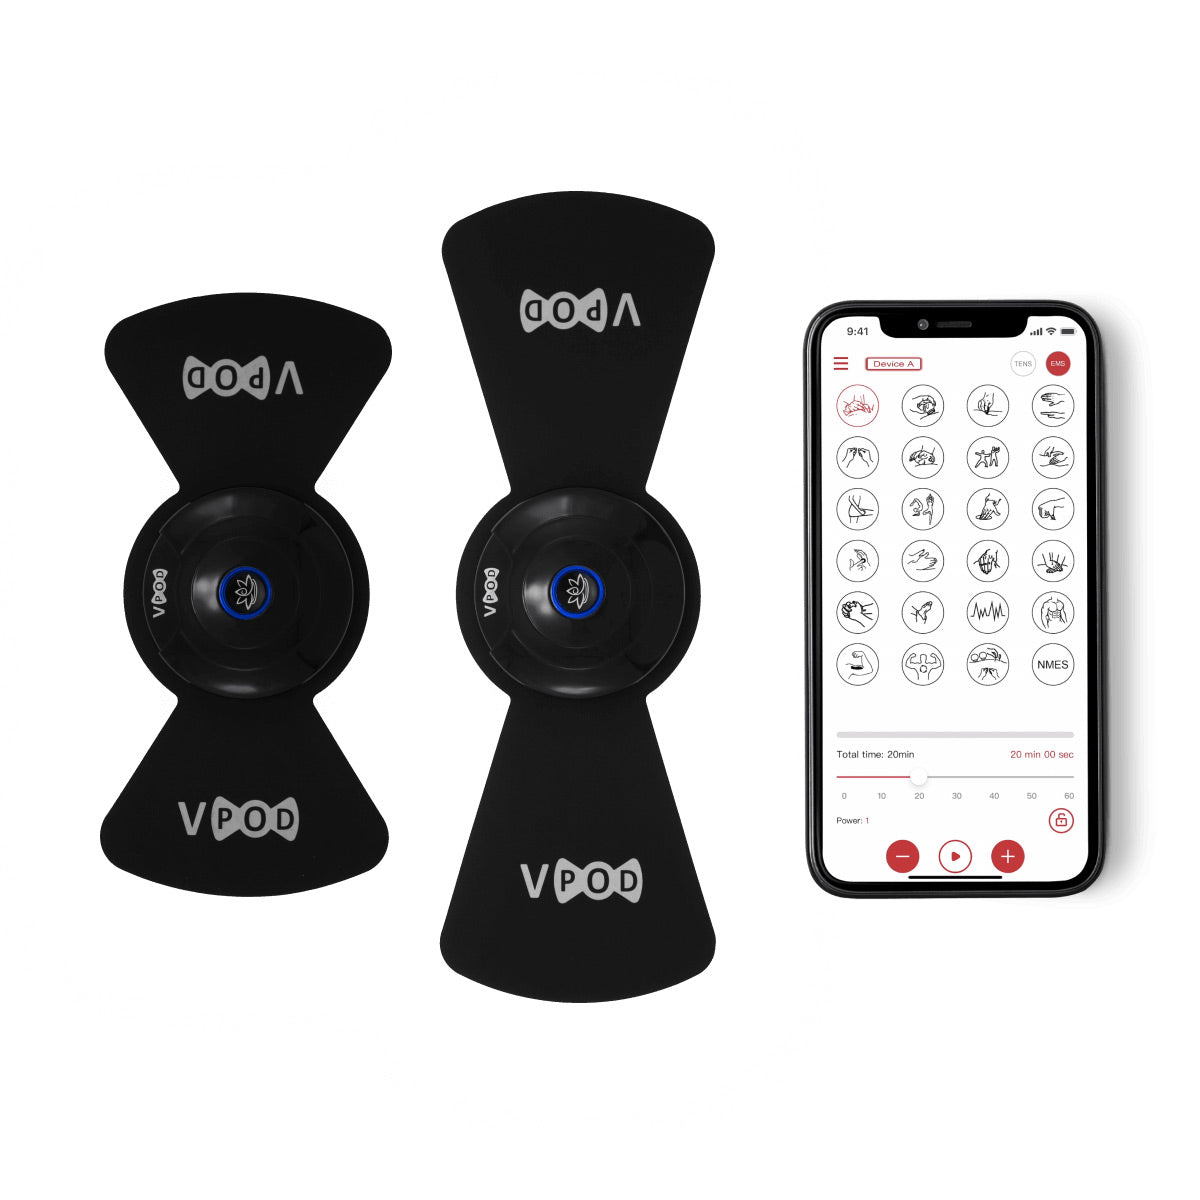 Verve TENS and EMS Unit for Muscle Rehabilitation – Massage Therapy Concepts